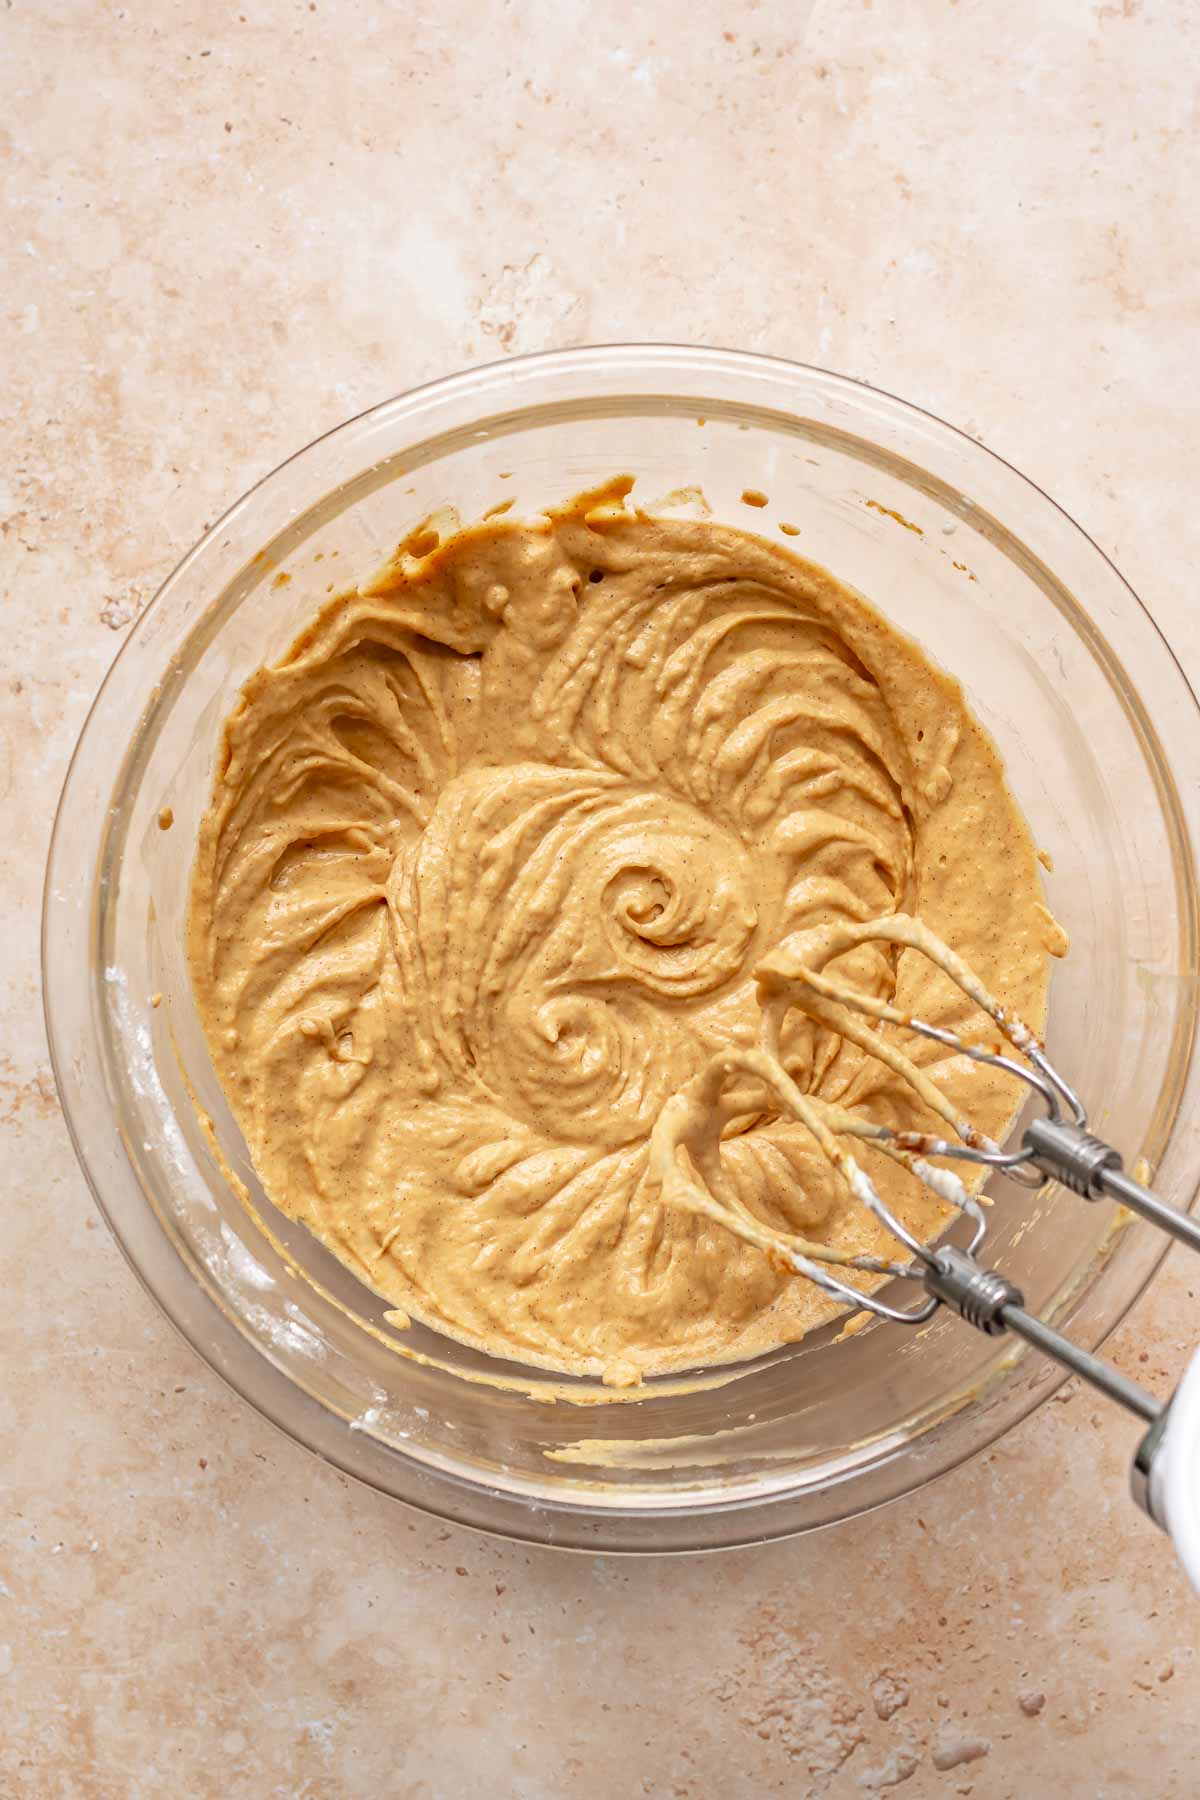 Pumpkin cream cheese batter with beaters mixing in a bowl.